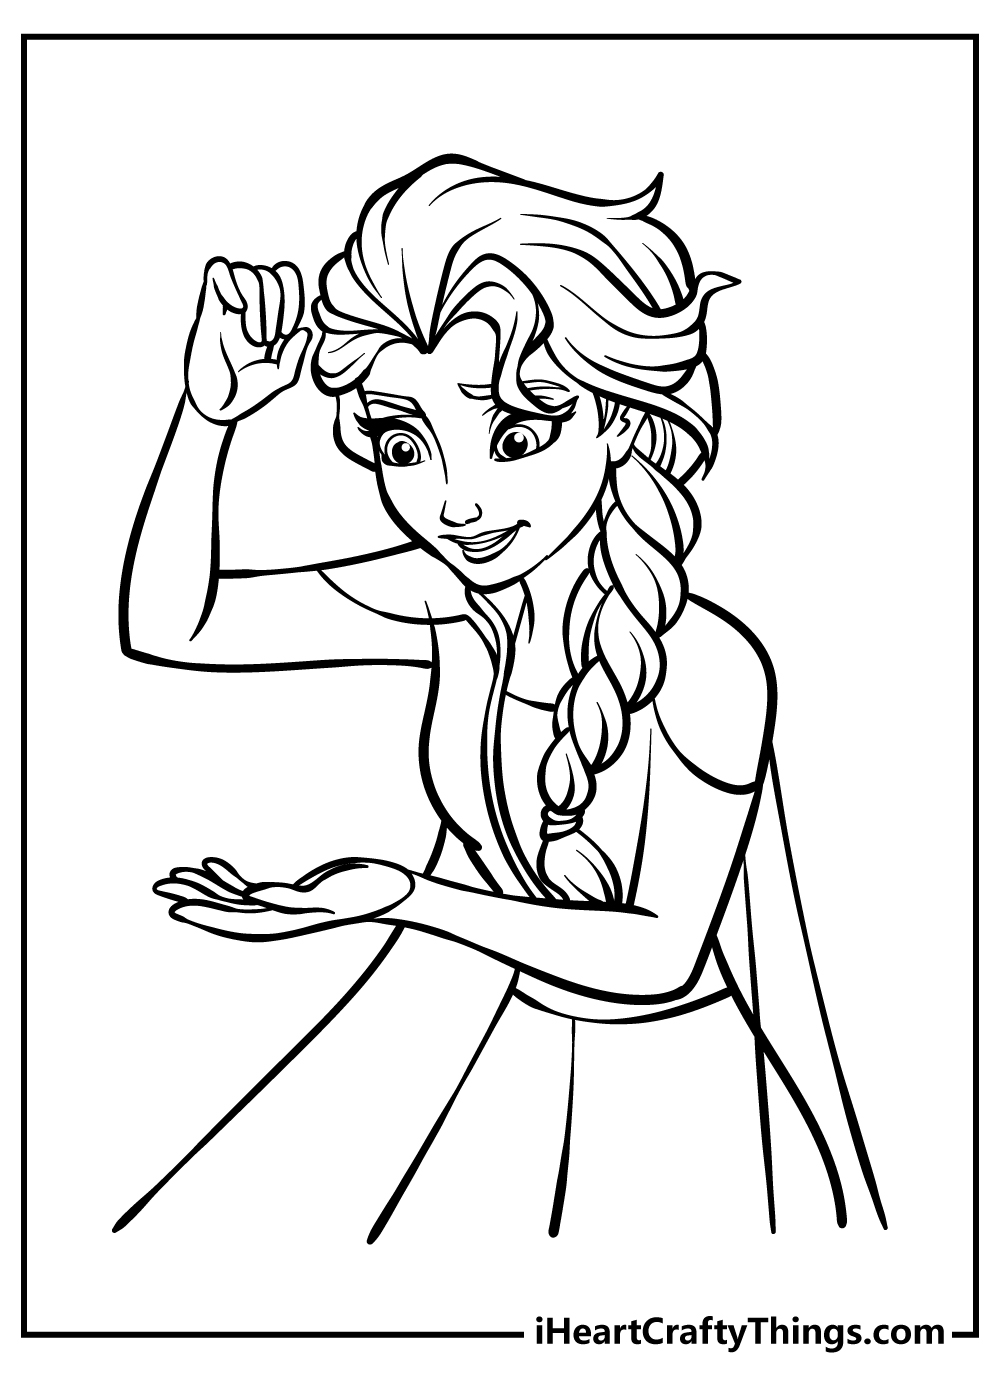 Printable Elsa Coloring Pages Updated 20